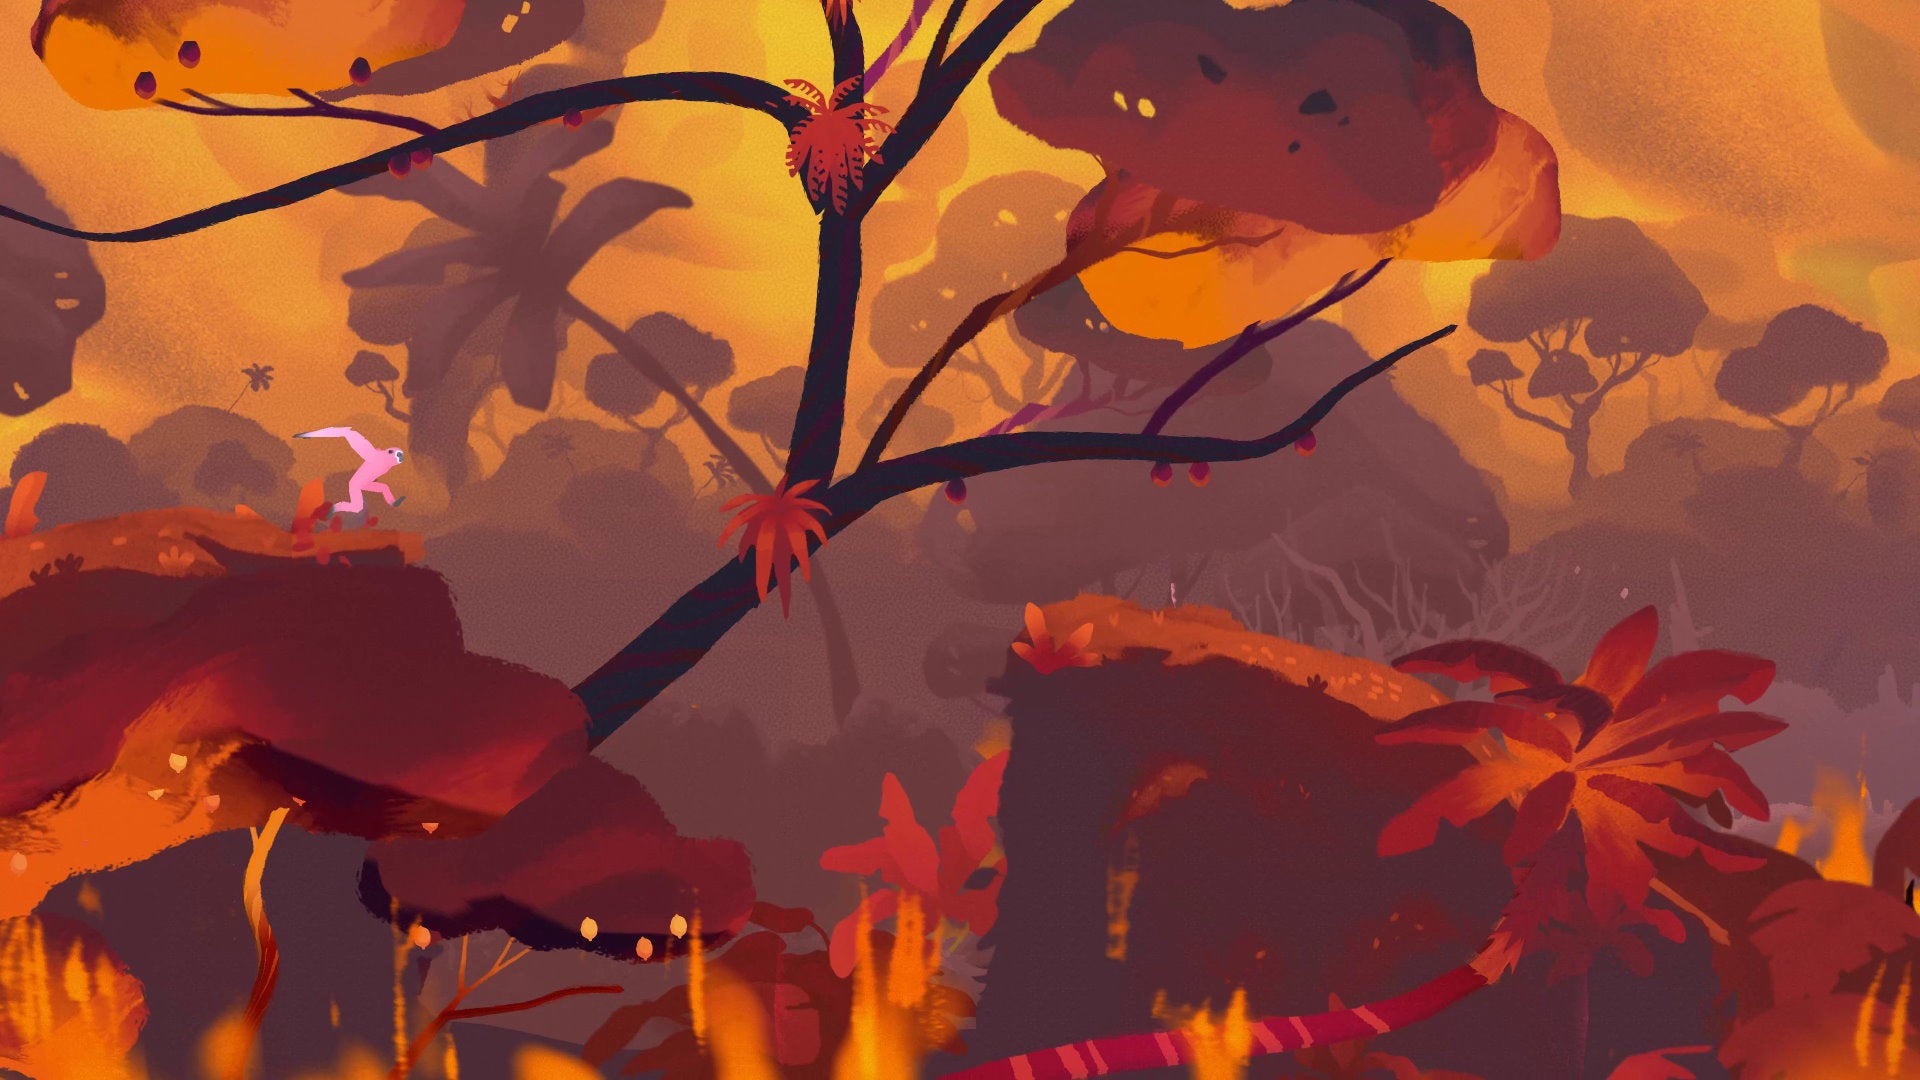 A pink gibbon runs across a fiery forest scene in Gibbon: Beyond The Trees